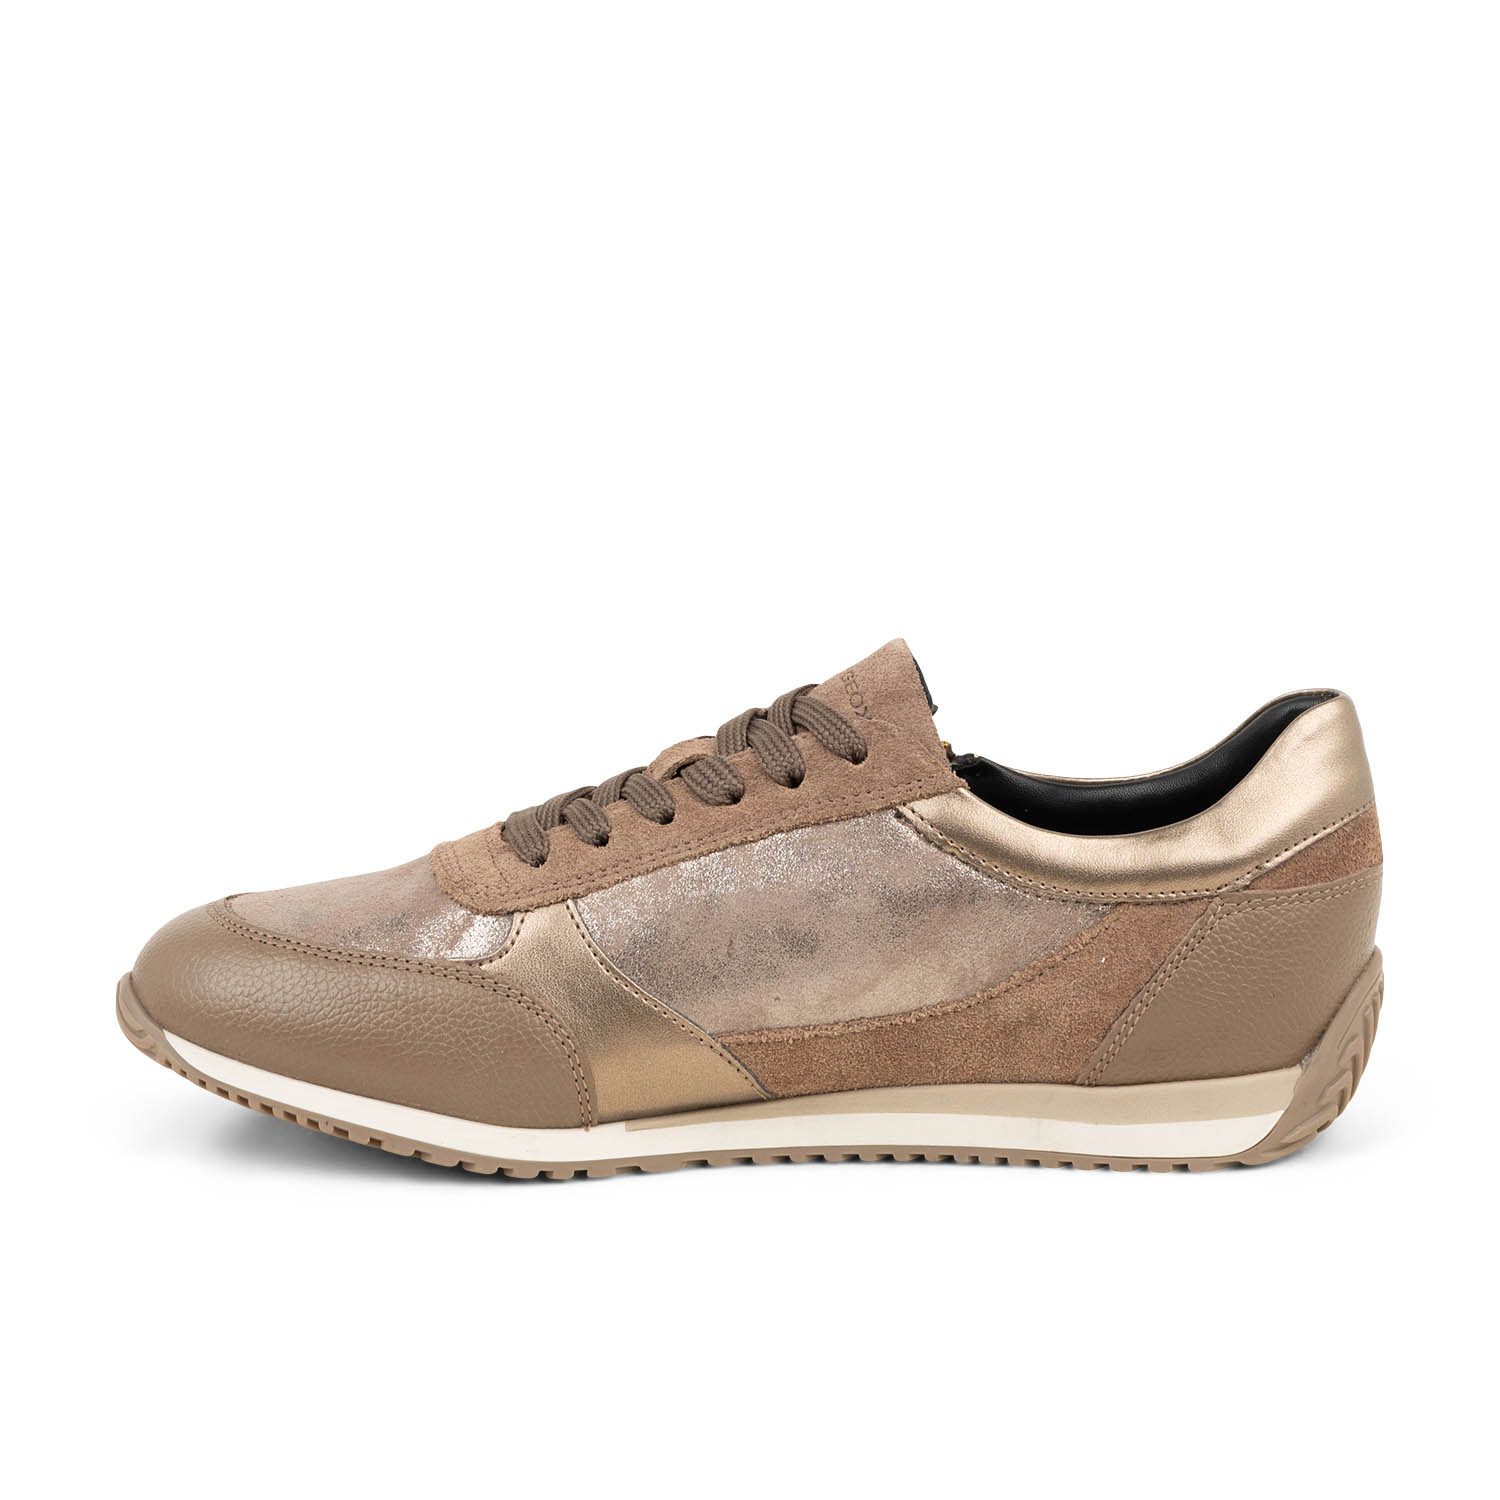 04 - CALITHE - GEOX - Chaussures à lacets - Cuir verni